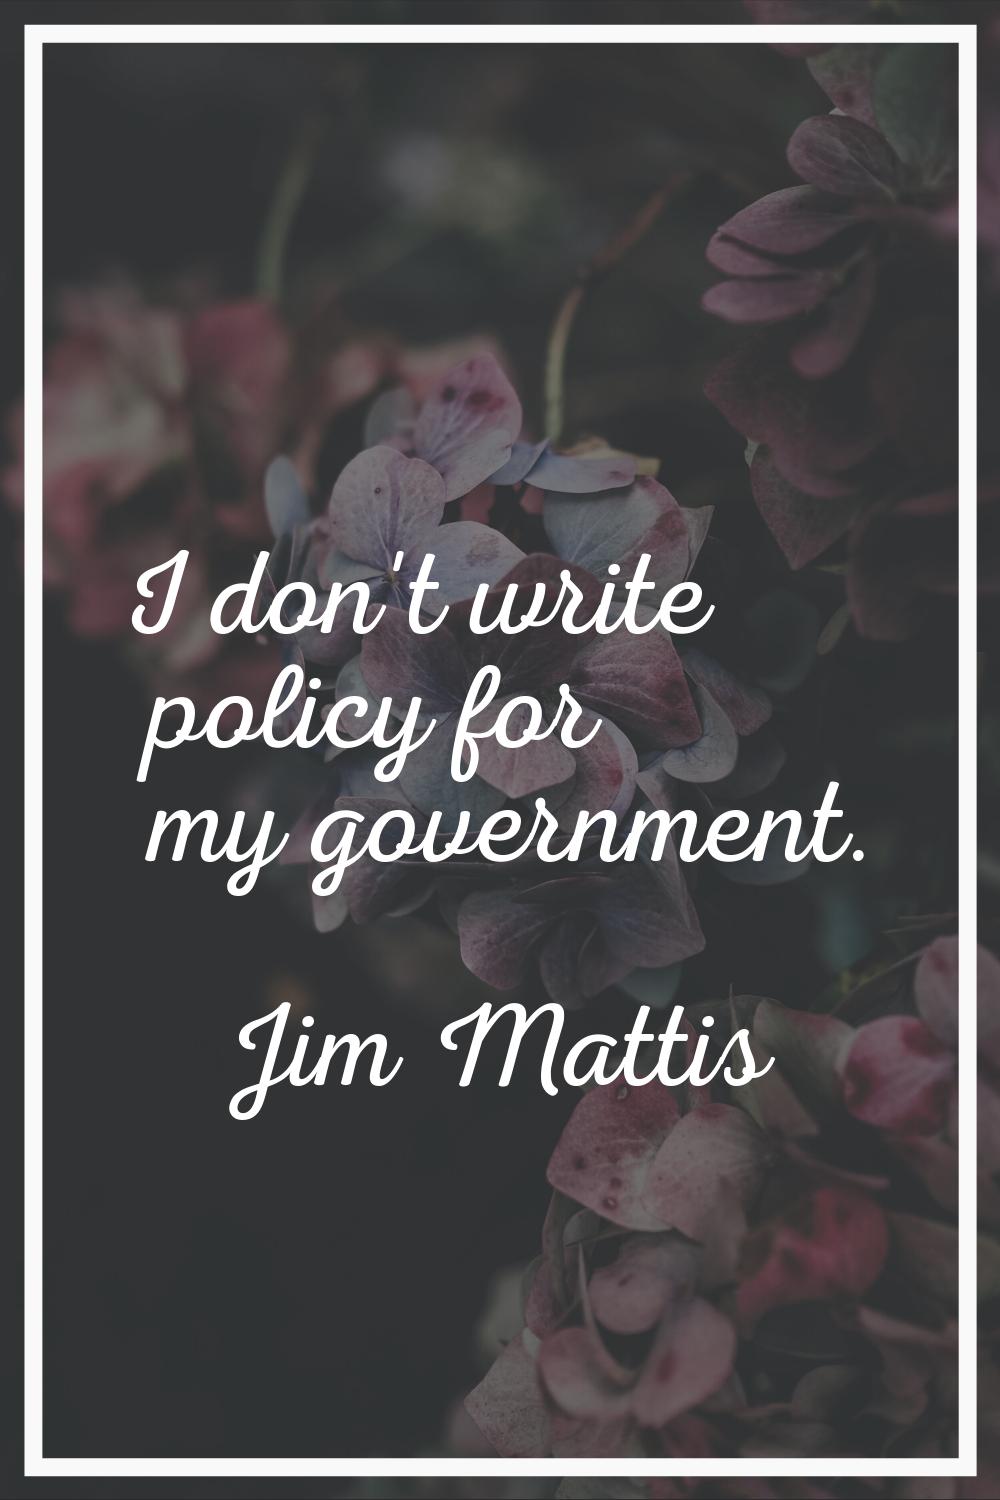 I don't write policy for my government.